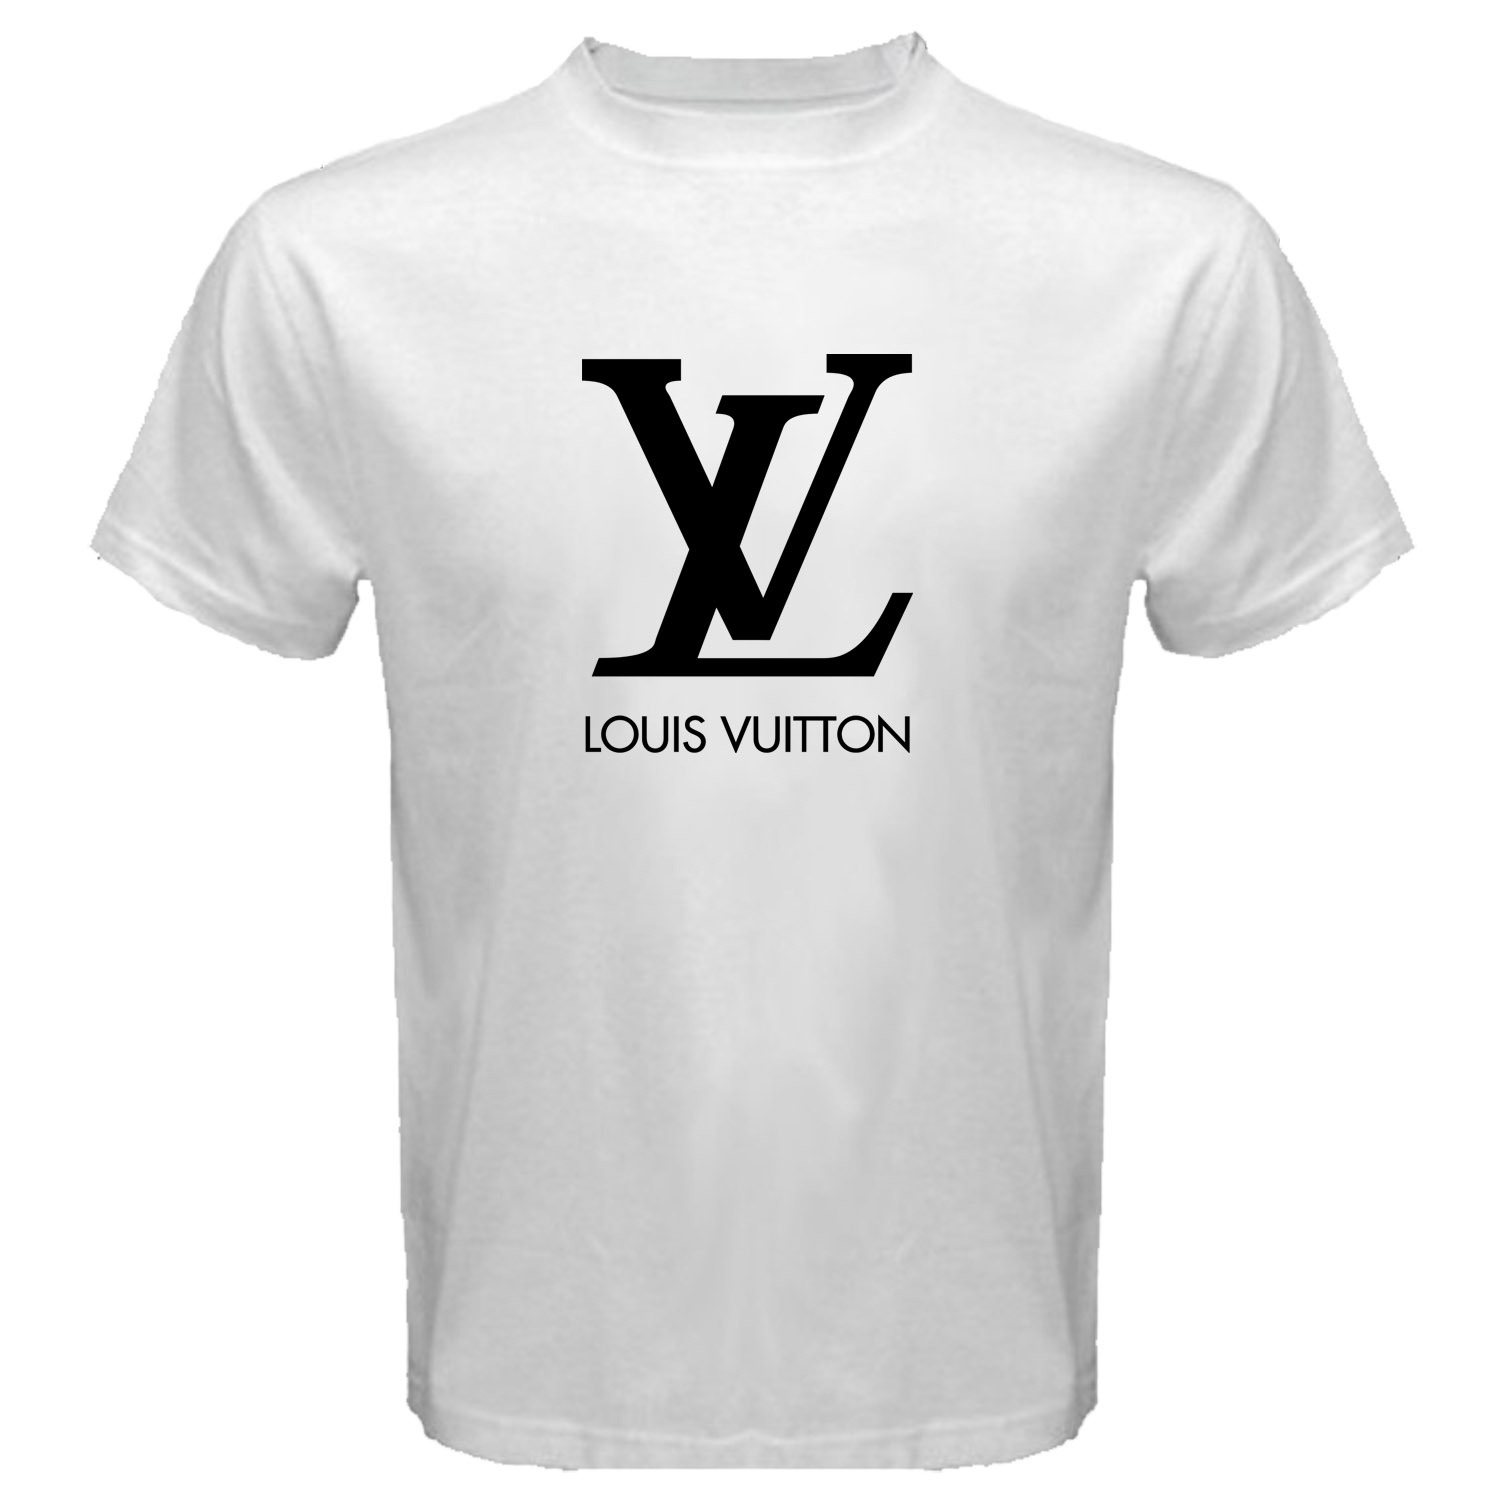 Beautiful Louis Vuitton T Shirt Price Philippines | Trend Style